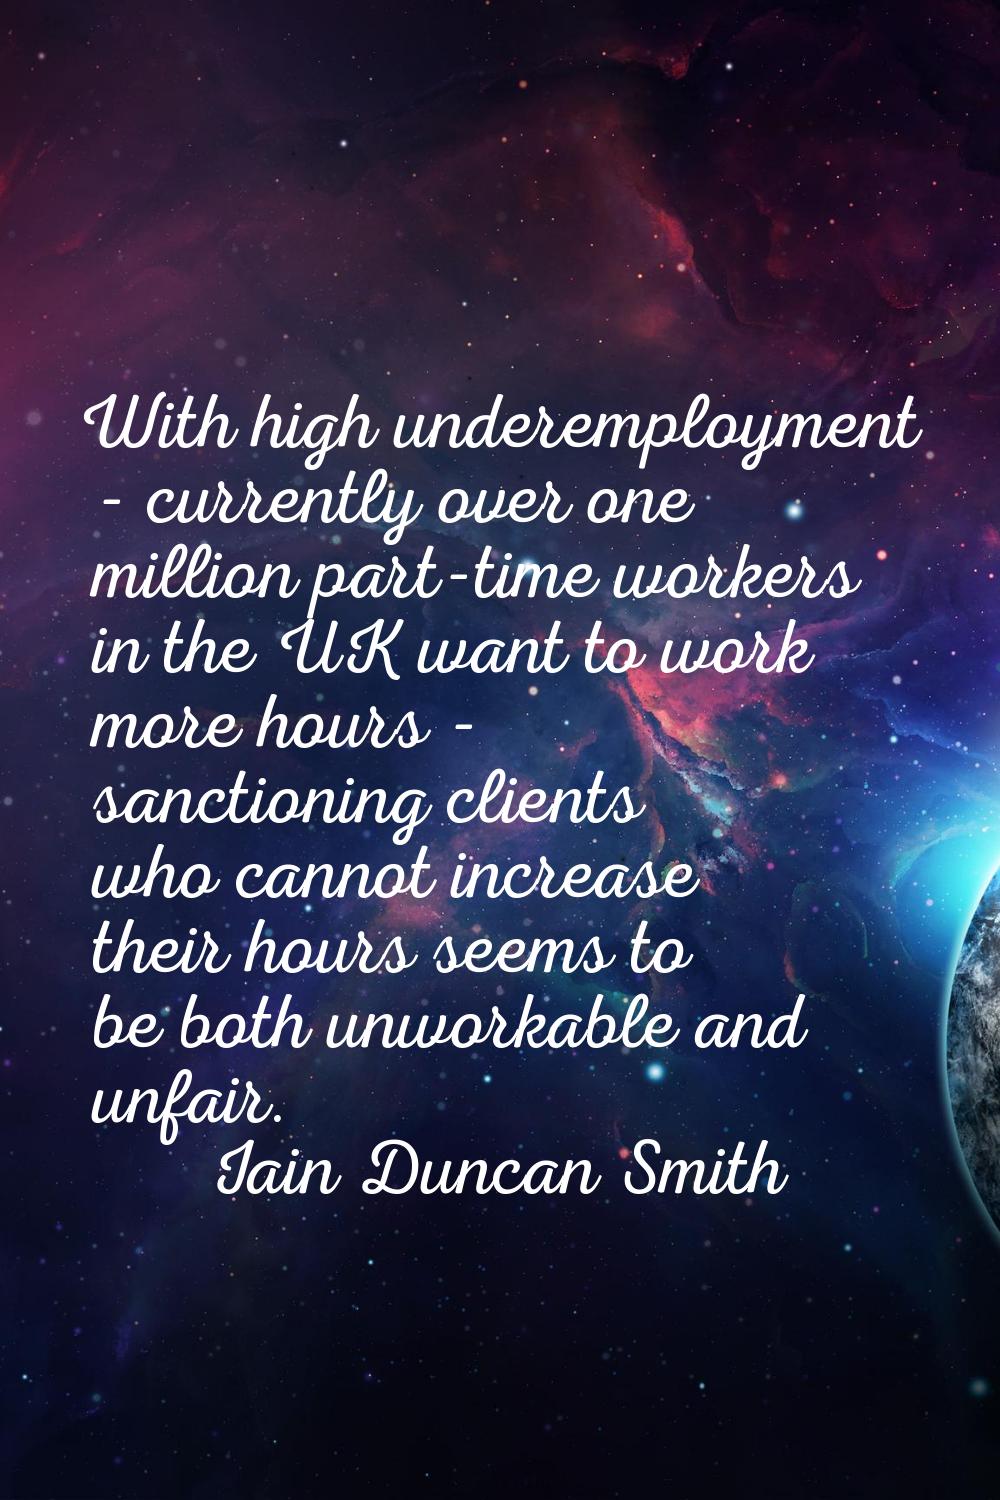 With high underemployment - currently over one million part-time workers in the UK want to work mor